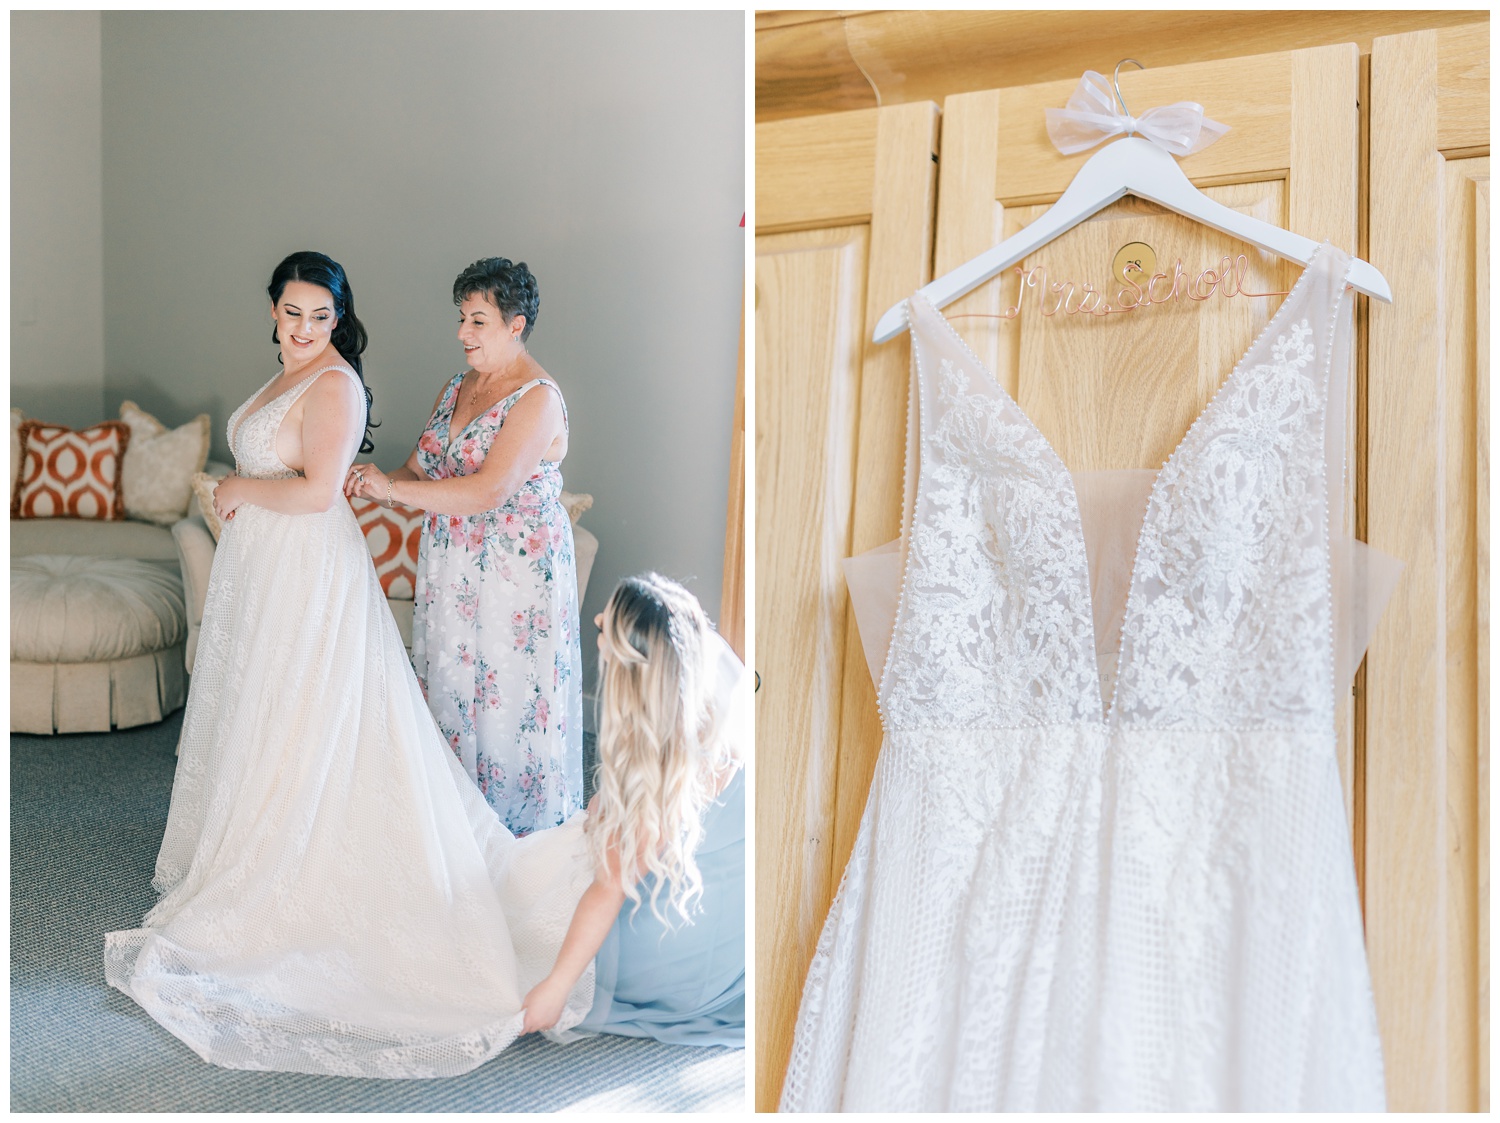 Bride putting her dress on with mother and maid of honor